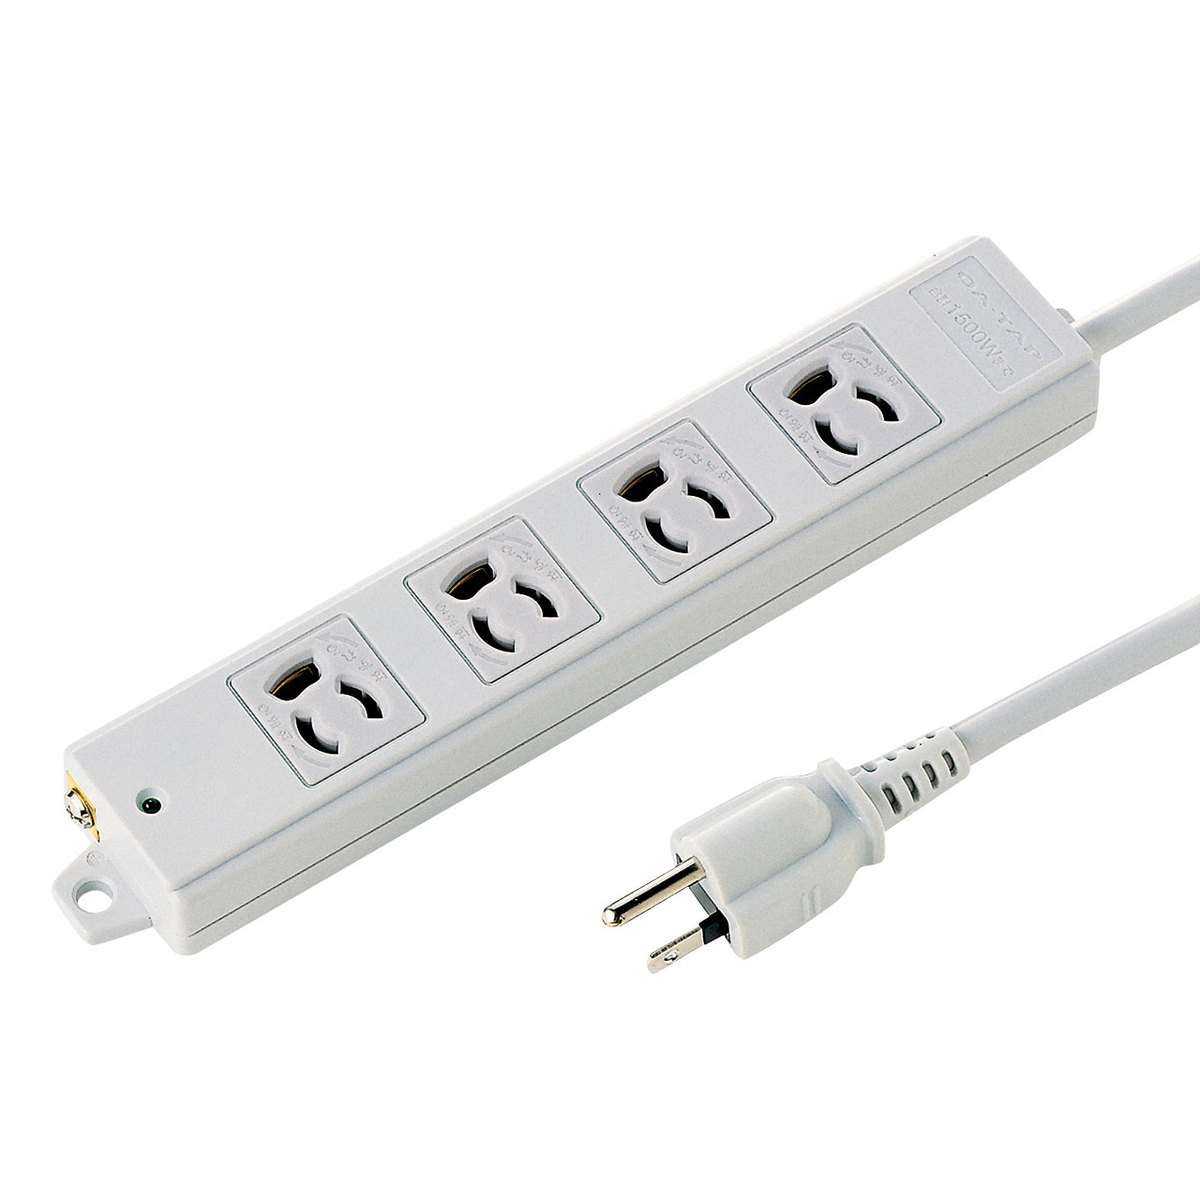 Power Strip, for Construction Use, 4 Outlets